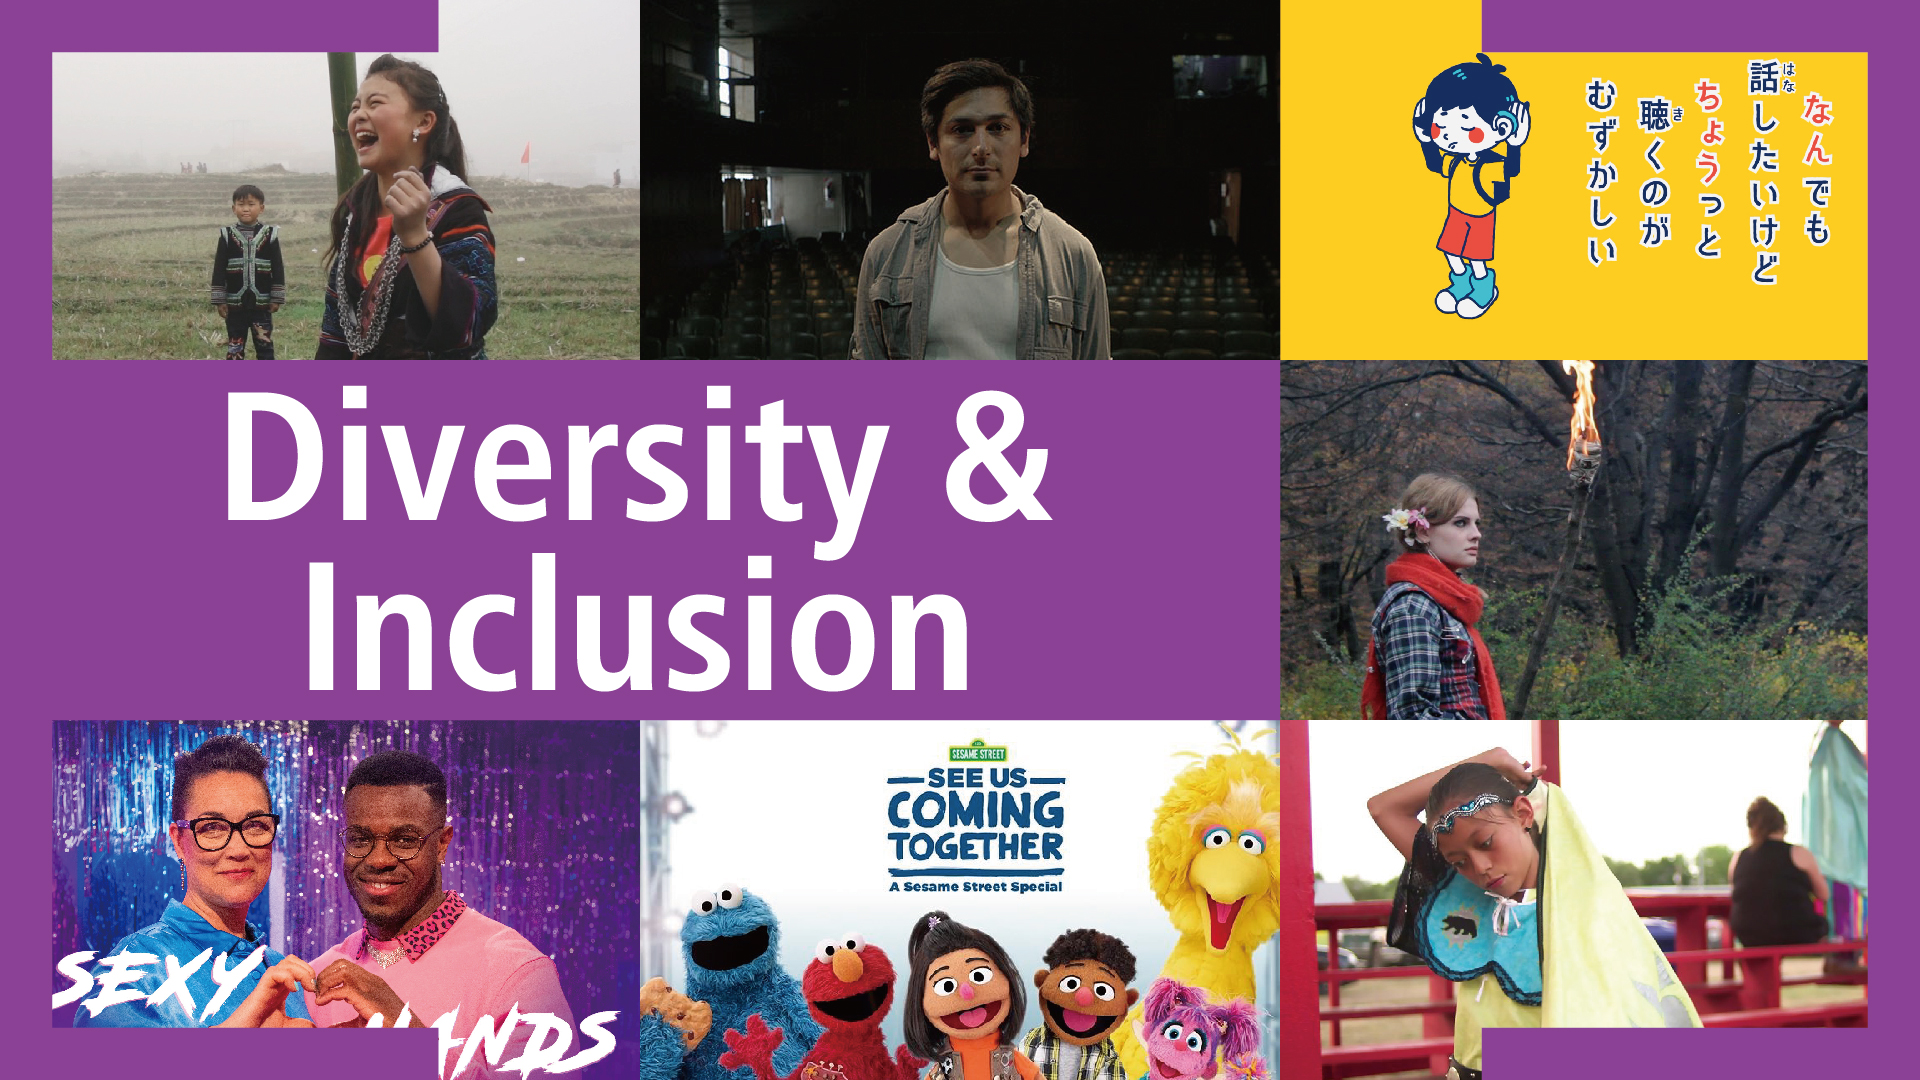 Showcasing “Diversity and Inclusion”